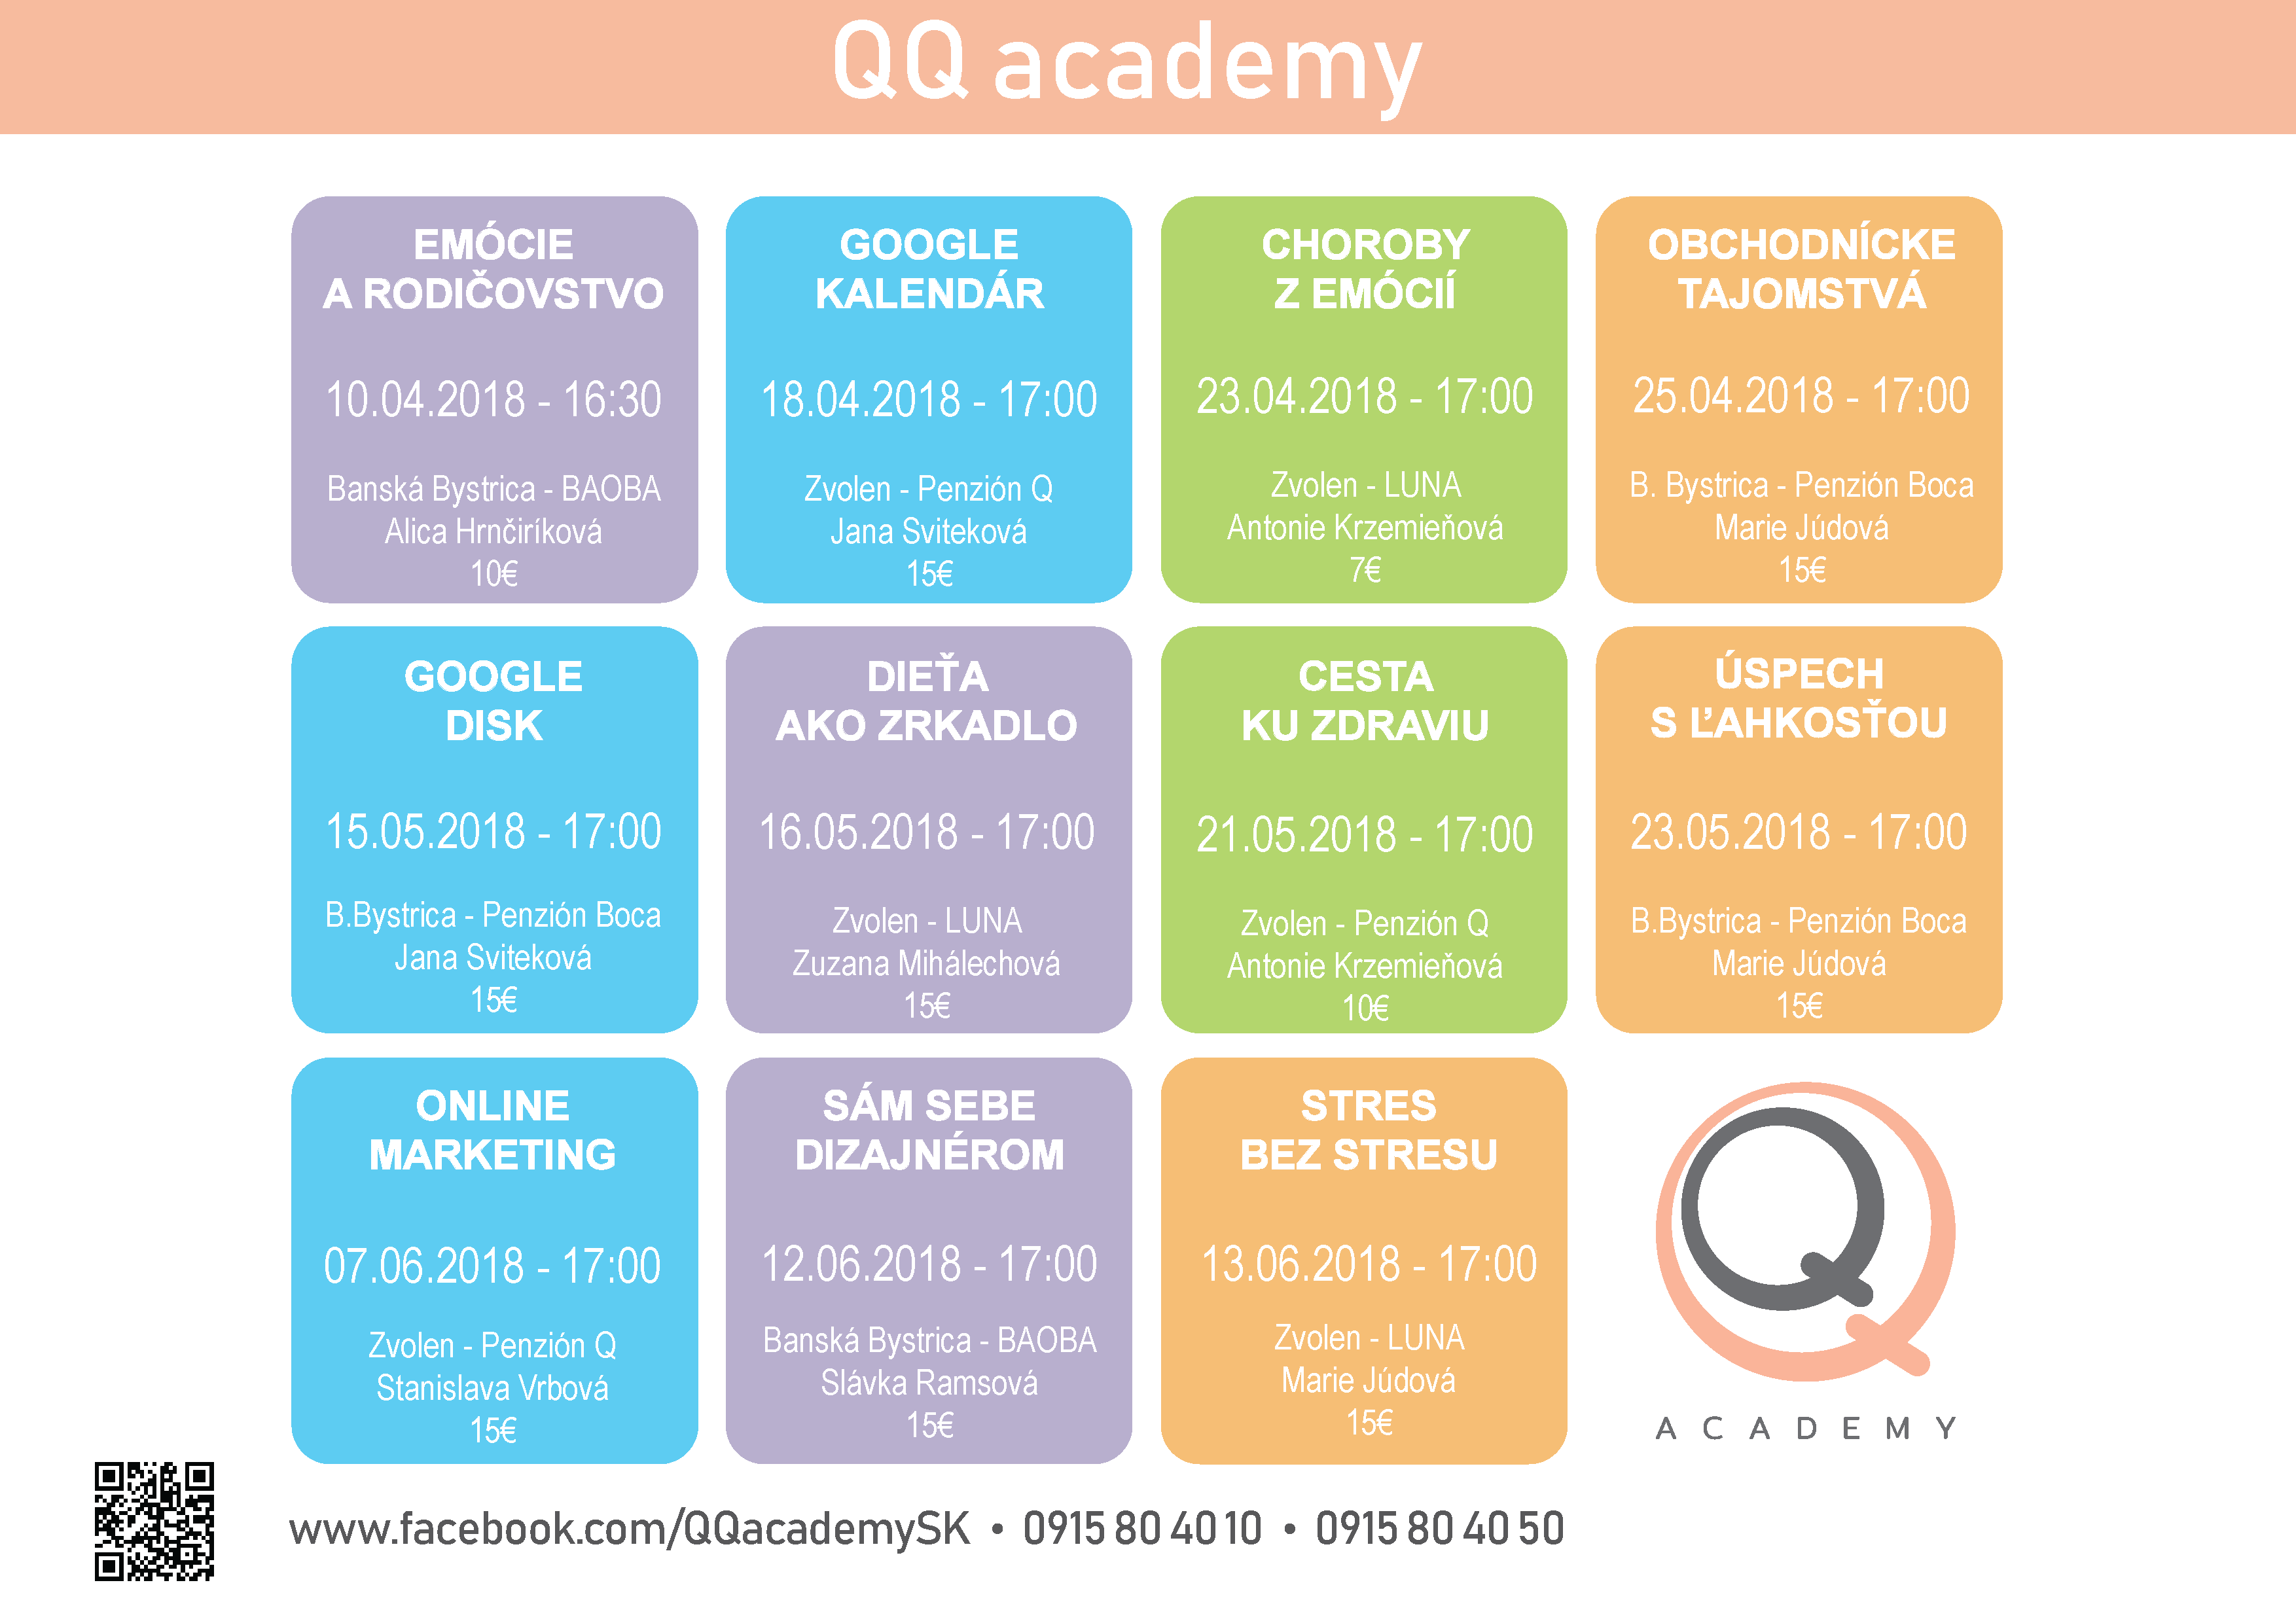 events/2018/04/admid0000/images/1_final poslednĂ˝.png